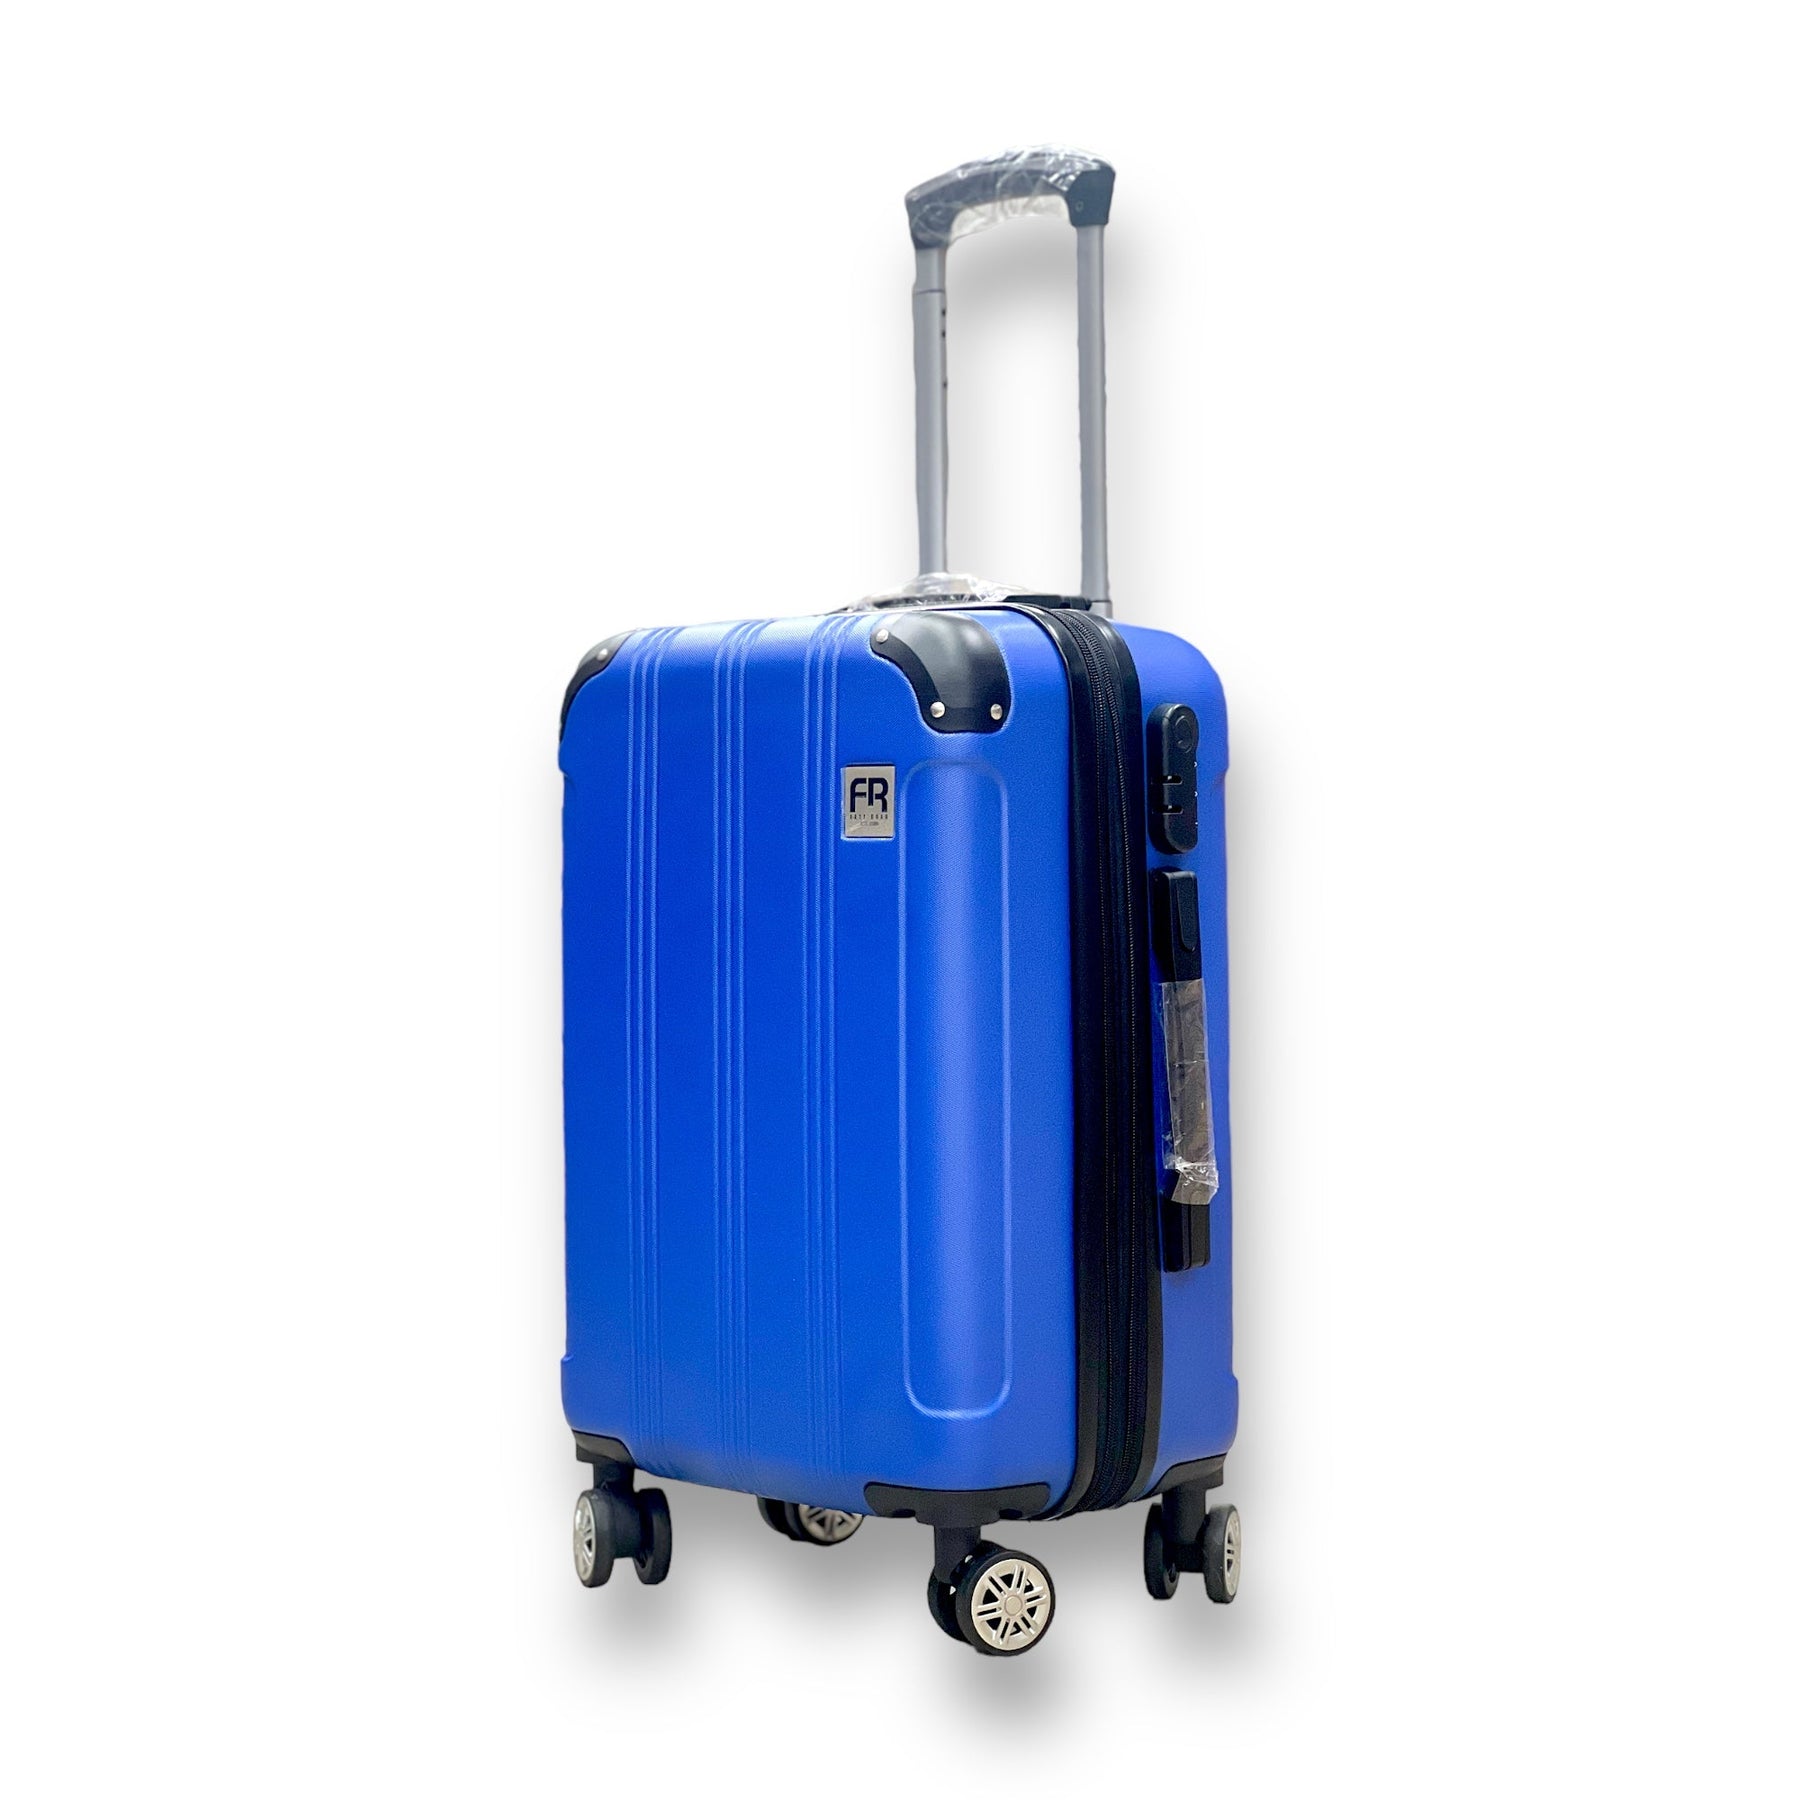 Fast Road Hardside Expandable Roller Luggage Blue, Carry-on 20 inch